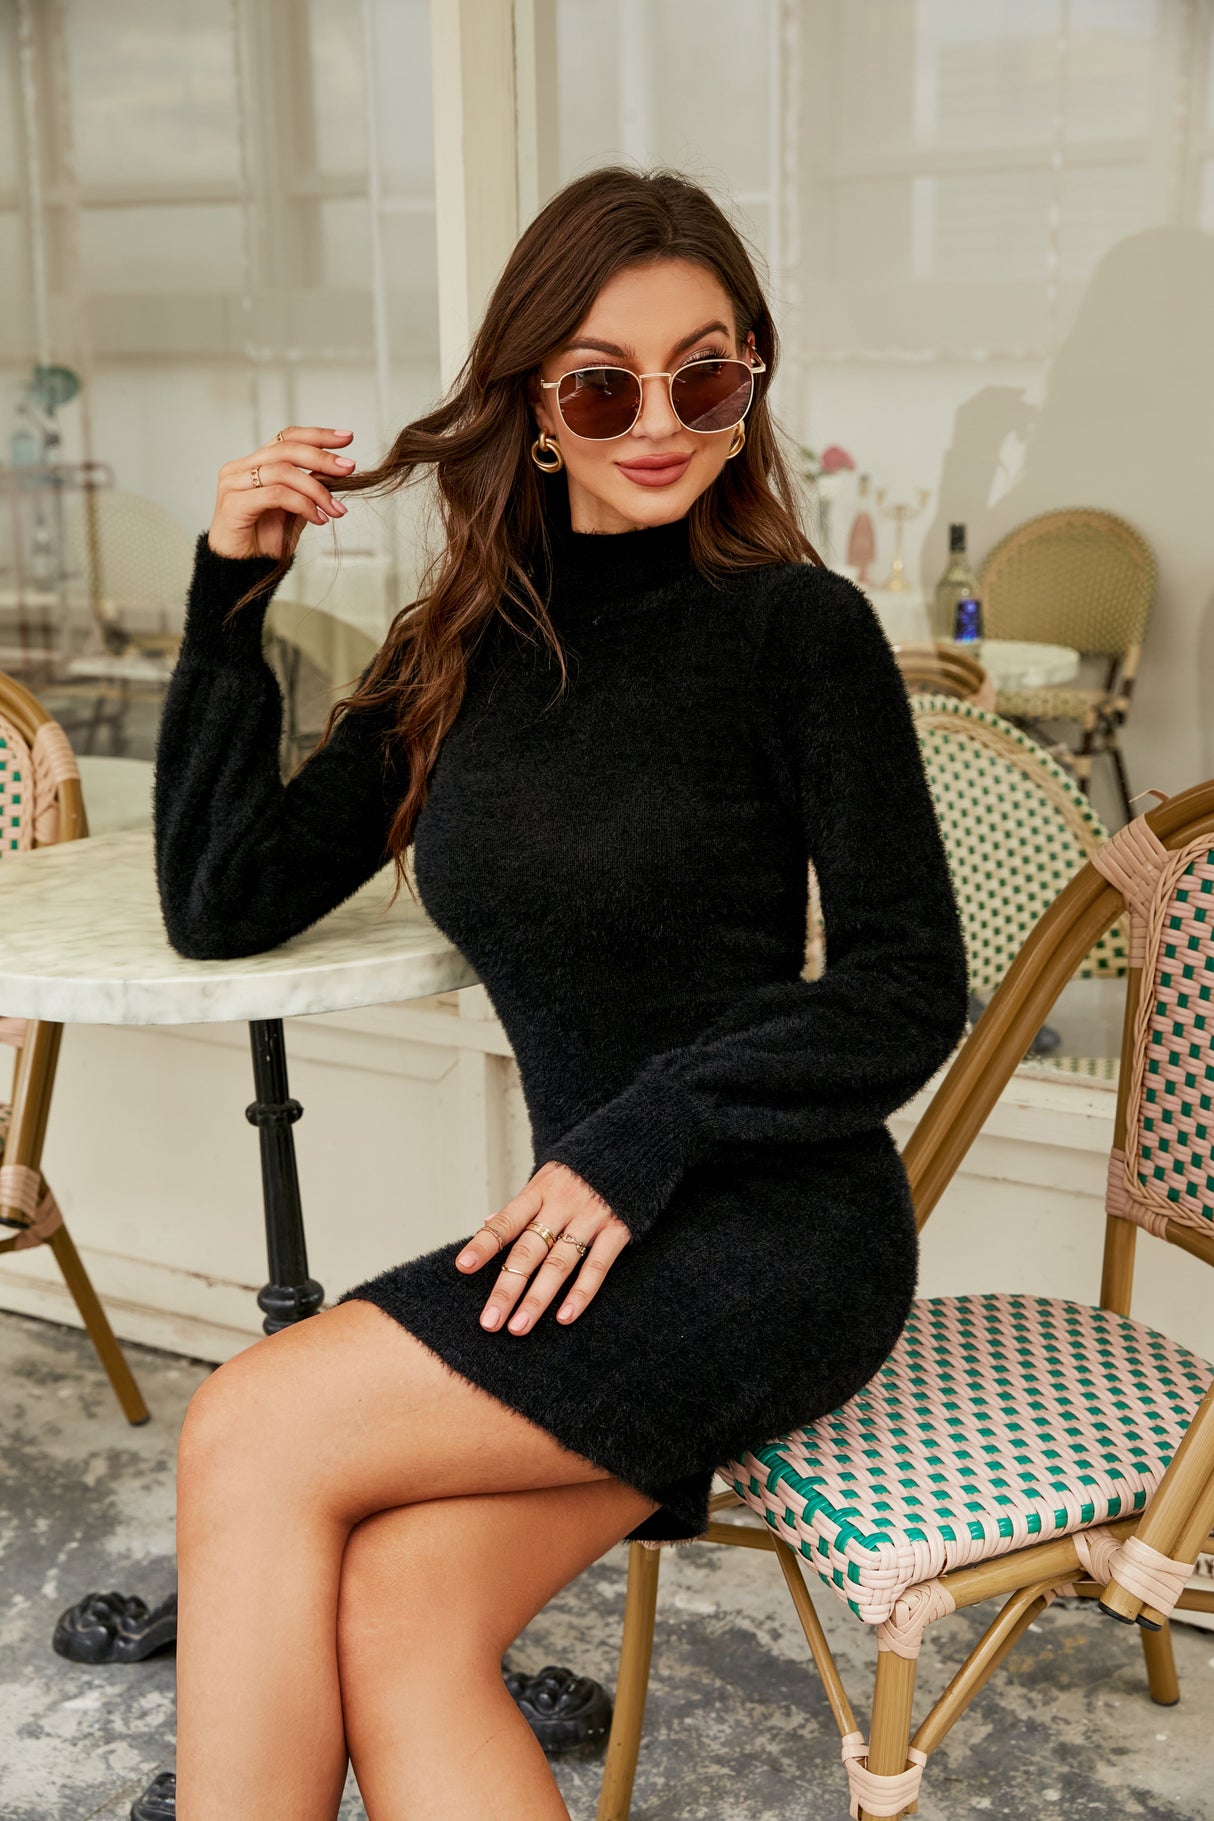 LUBOT Women's Sweater Dress - Stylish Knit for Effortless Elegance and Comfort Pullover Dress - GexWorldwide